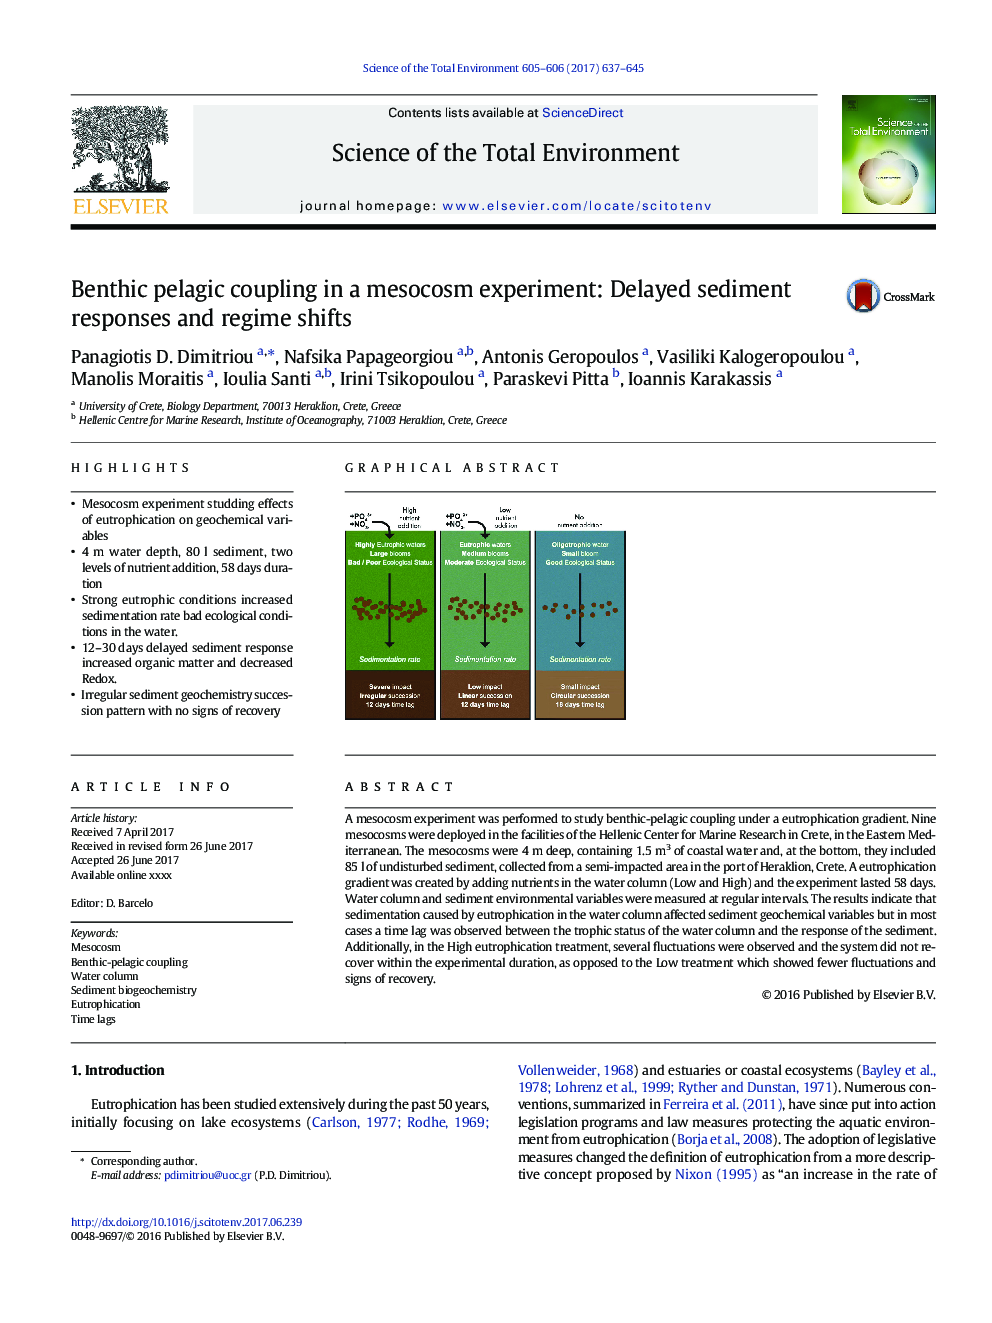 Benthic pelagic coupling in a mesocosm experiment: Delayed sediment responses and regime shifts